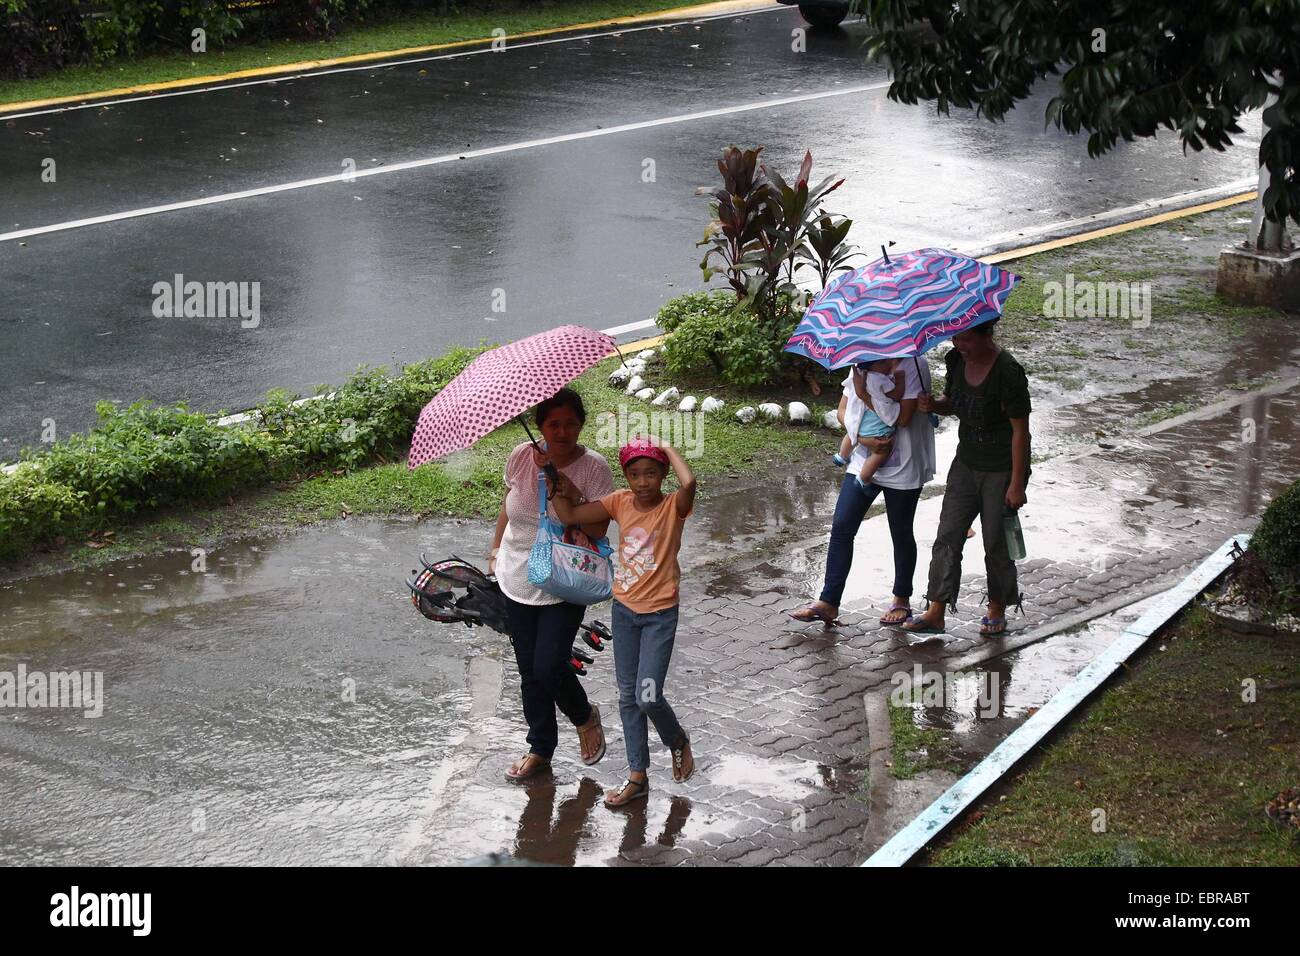 Quezon City, Philippines. 4th Dec, 2014. People walk with umbrellas in the rain in Quezon City, the Philippines, on Dec. 4, 2014. Typhoon Hagupit is packing maximum winds of 205 kph near the center and gustiness of up to 240 kph. The Philippine government will implement forced evacuation in areas that are expected to be hit by typhoon Hagupit (local name 'Ruby'), a senior government official said Thursday. Credit:  Rouelle Umali/Xinhua/Alamy Live News Stock Photo